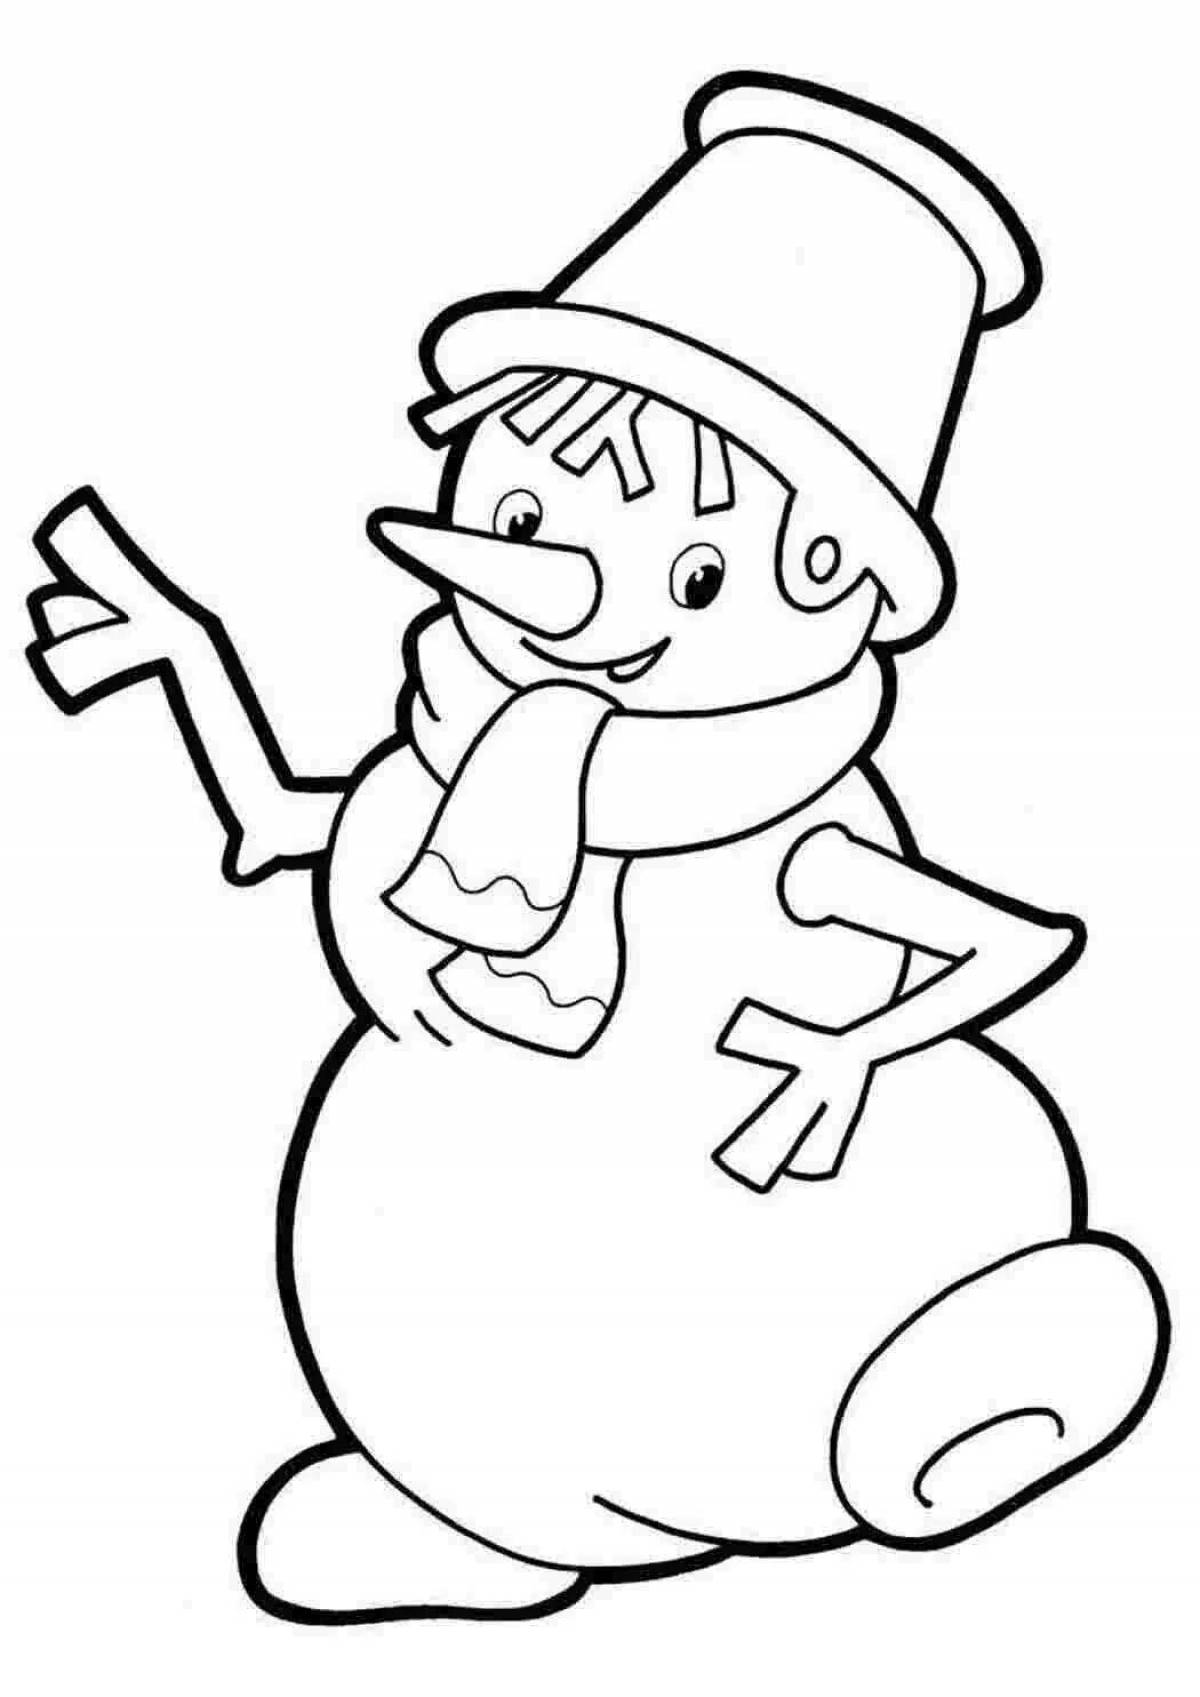 Attractive snowman coloring book for 5 year olds